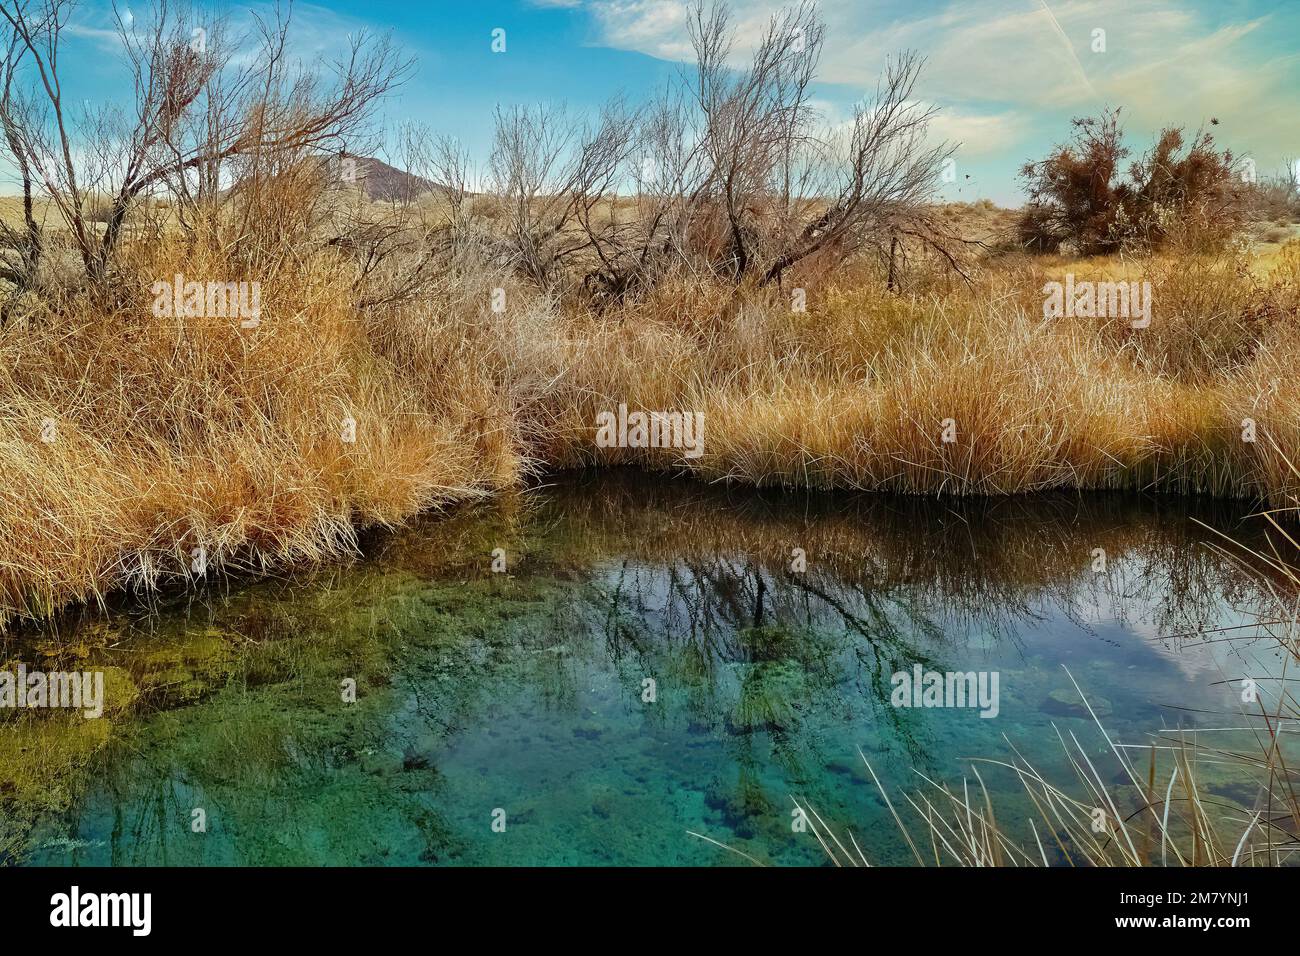 Spring in the oasis Ash Meadows, in the Mojave Desert near Pahrump, Nevada, where the endangered pupfish (Cyprinodon nevadensis) live Stock Photo